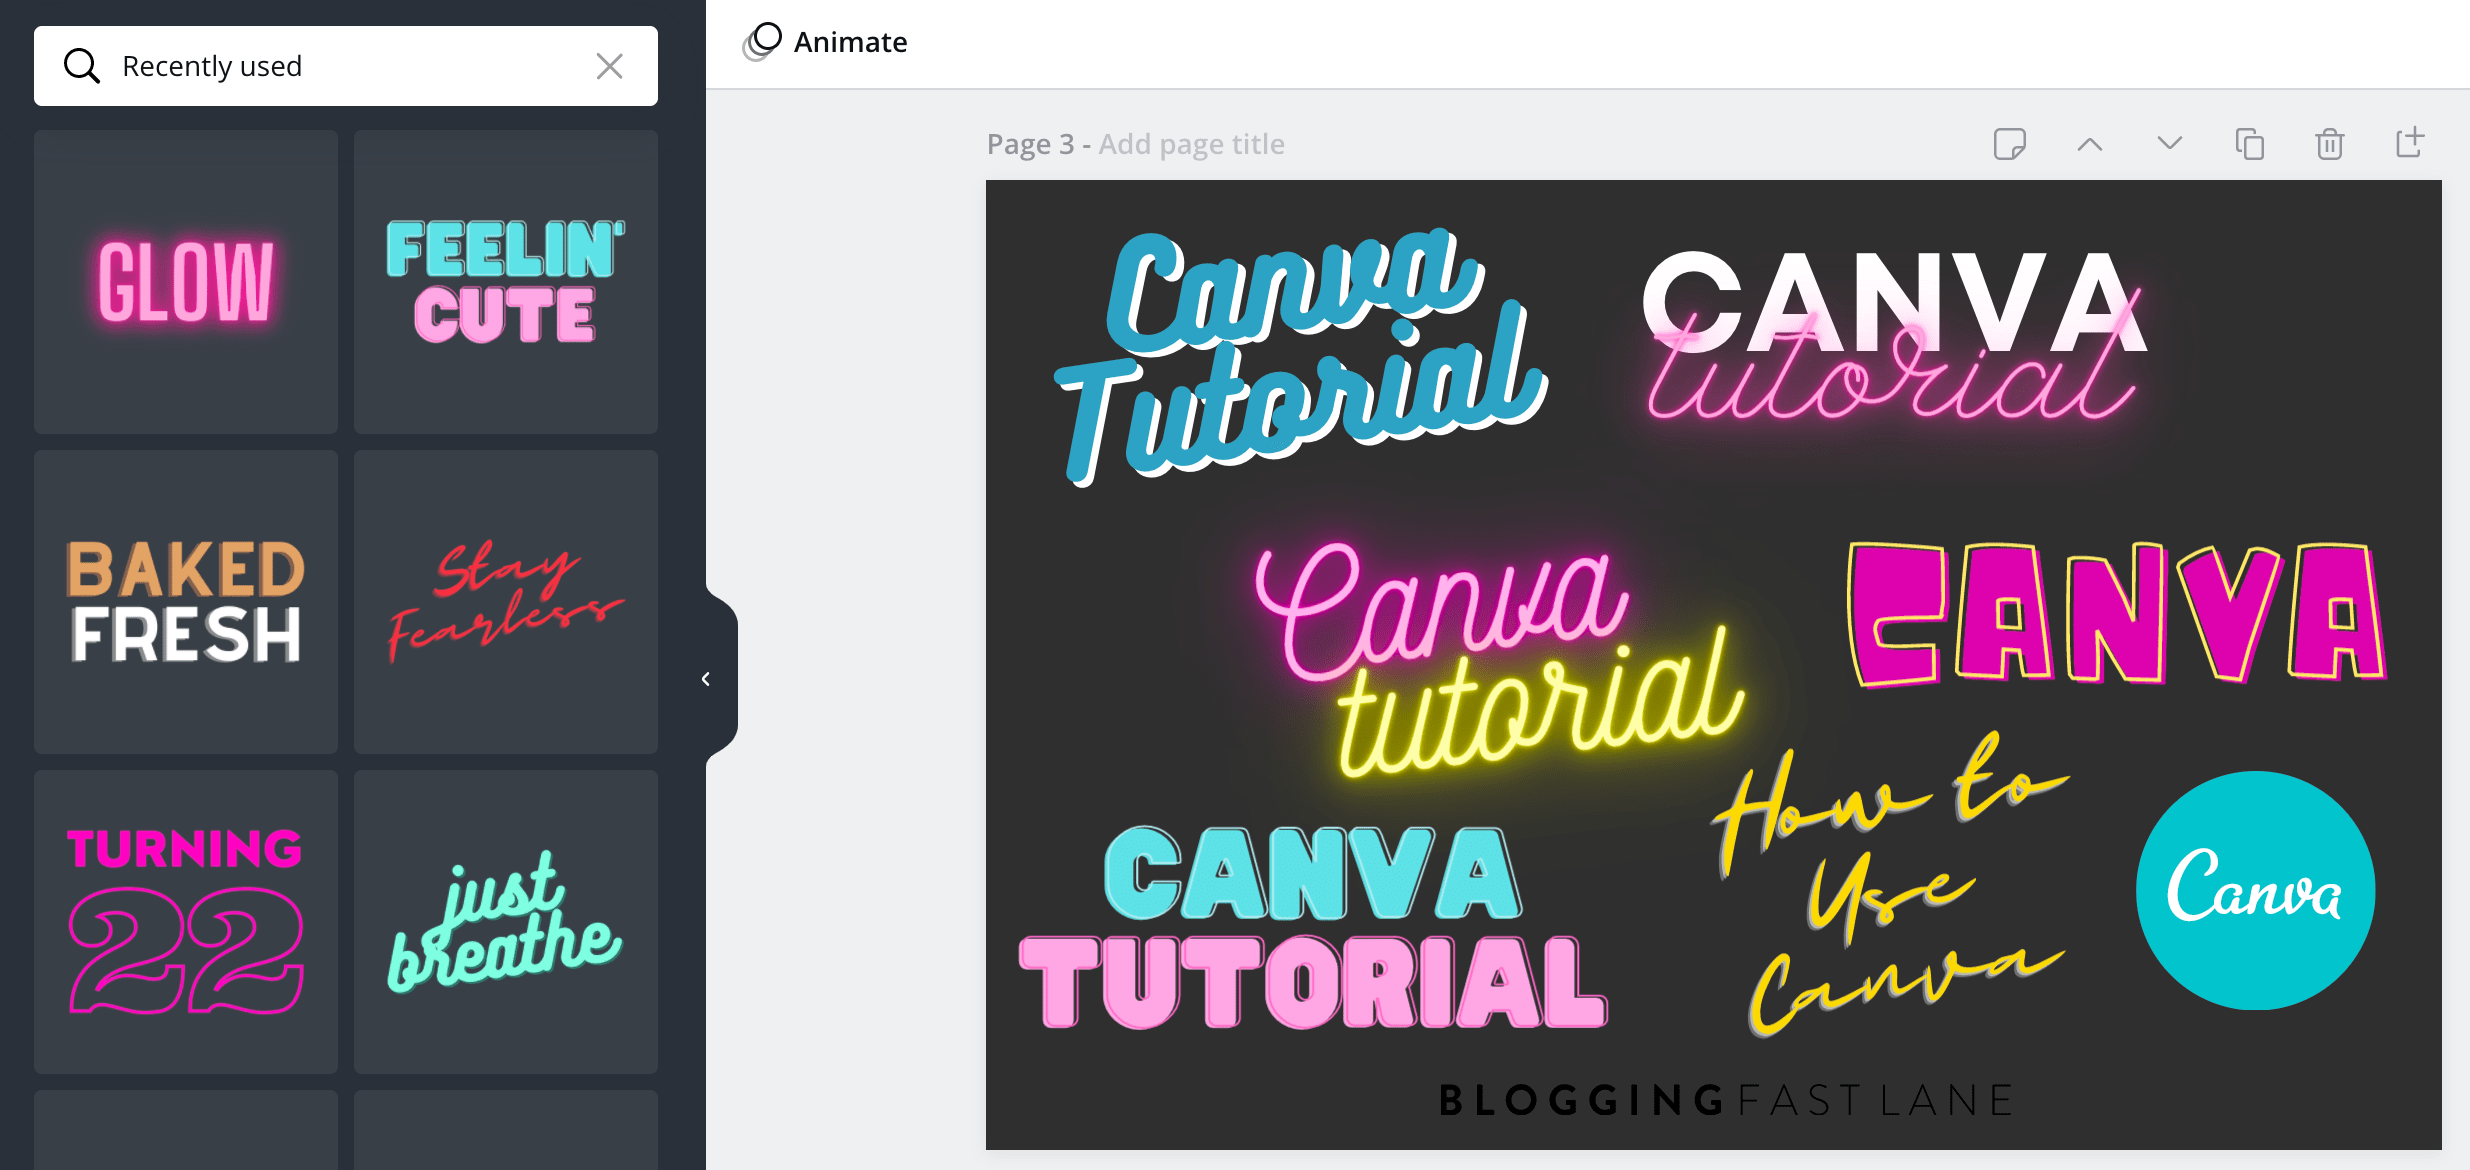 How to Use Canva Pro: The Best All-In-One Design Tool for Bloggers